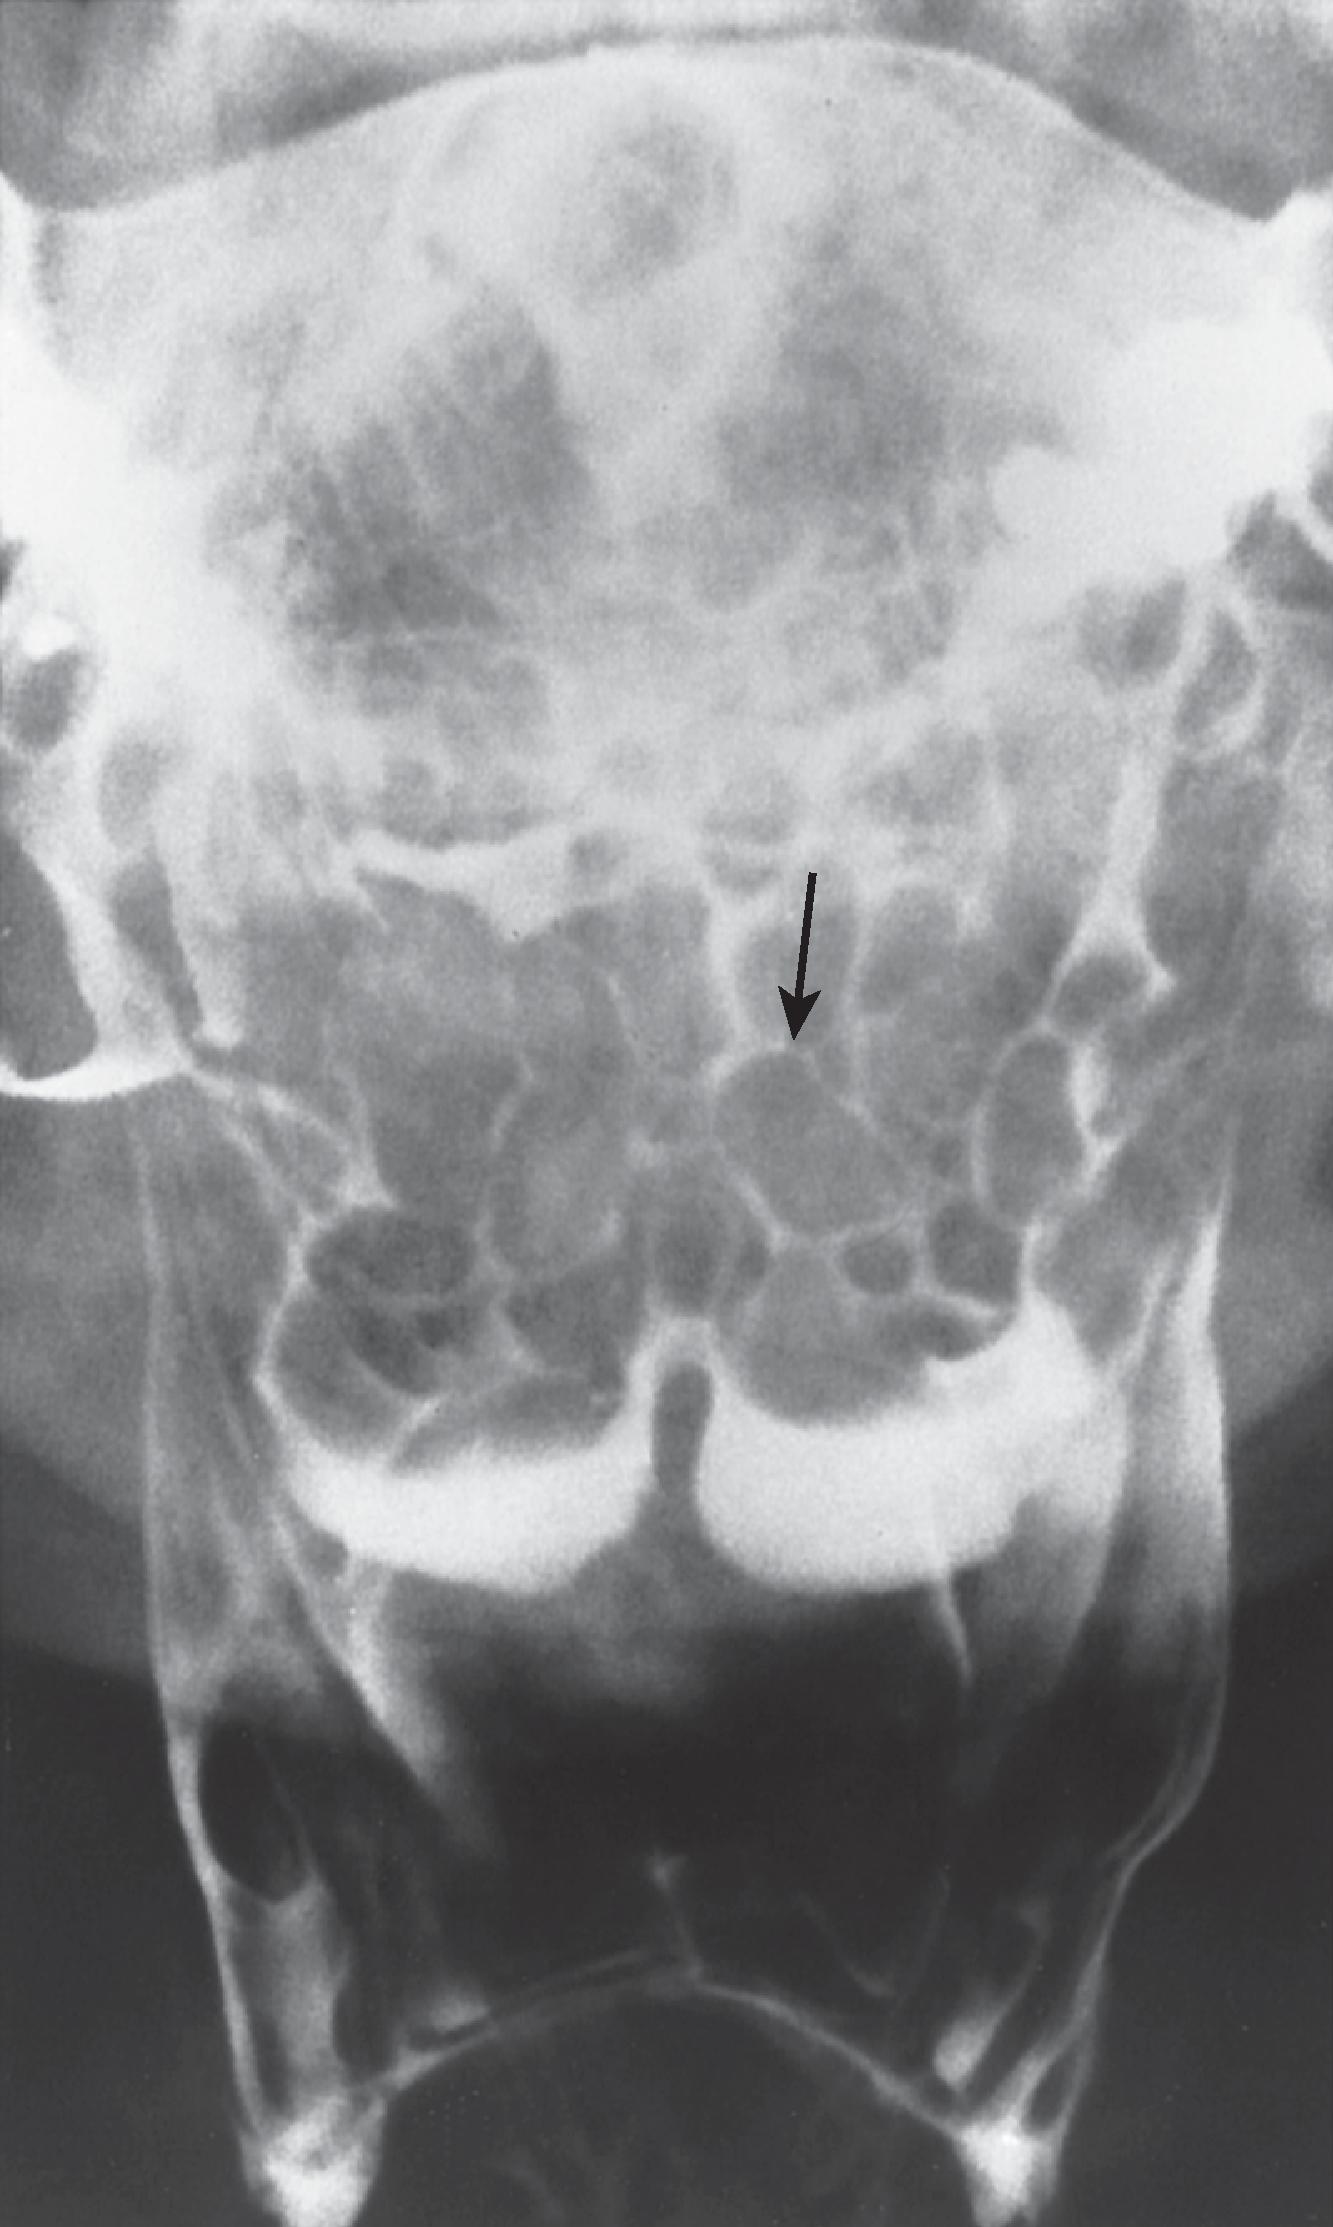 Fig. 5.11, Lymphoid hyperplasia of the base of the tongue. Frontal view of the pharynx shows large, smooth-surfaced, round to ovoid nodules ( arrow ) symmetrically distributed over the surface of the tongue base.